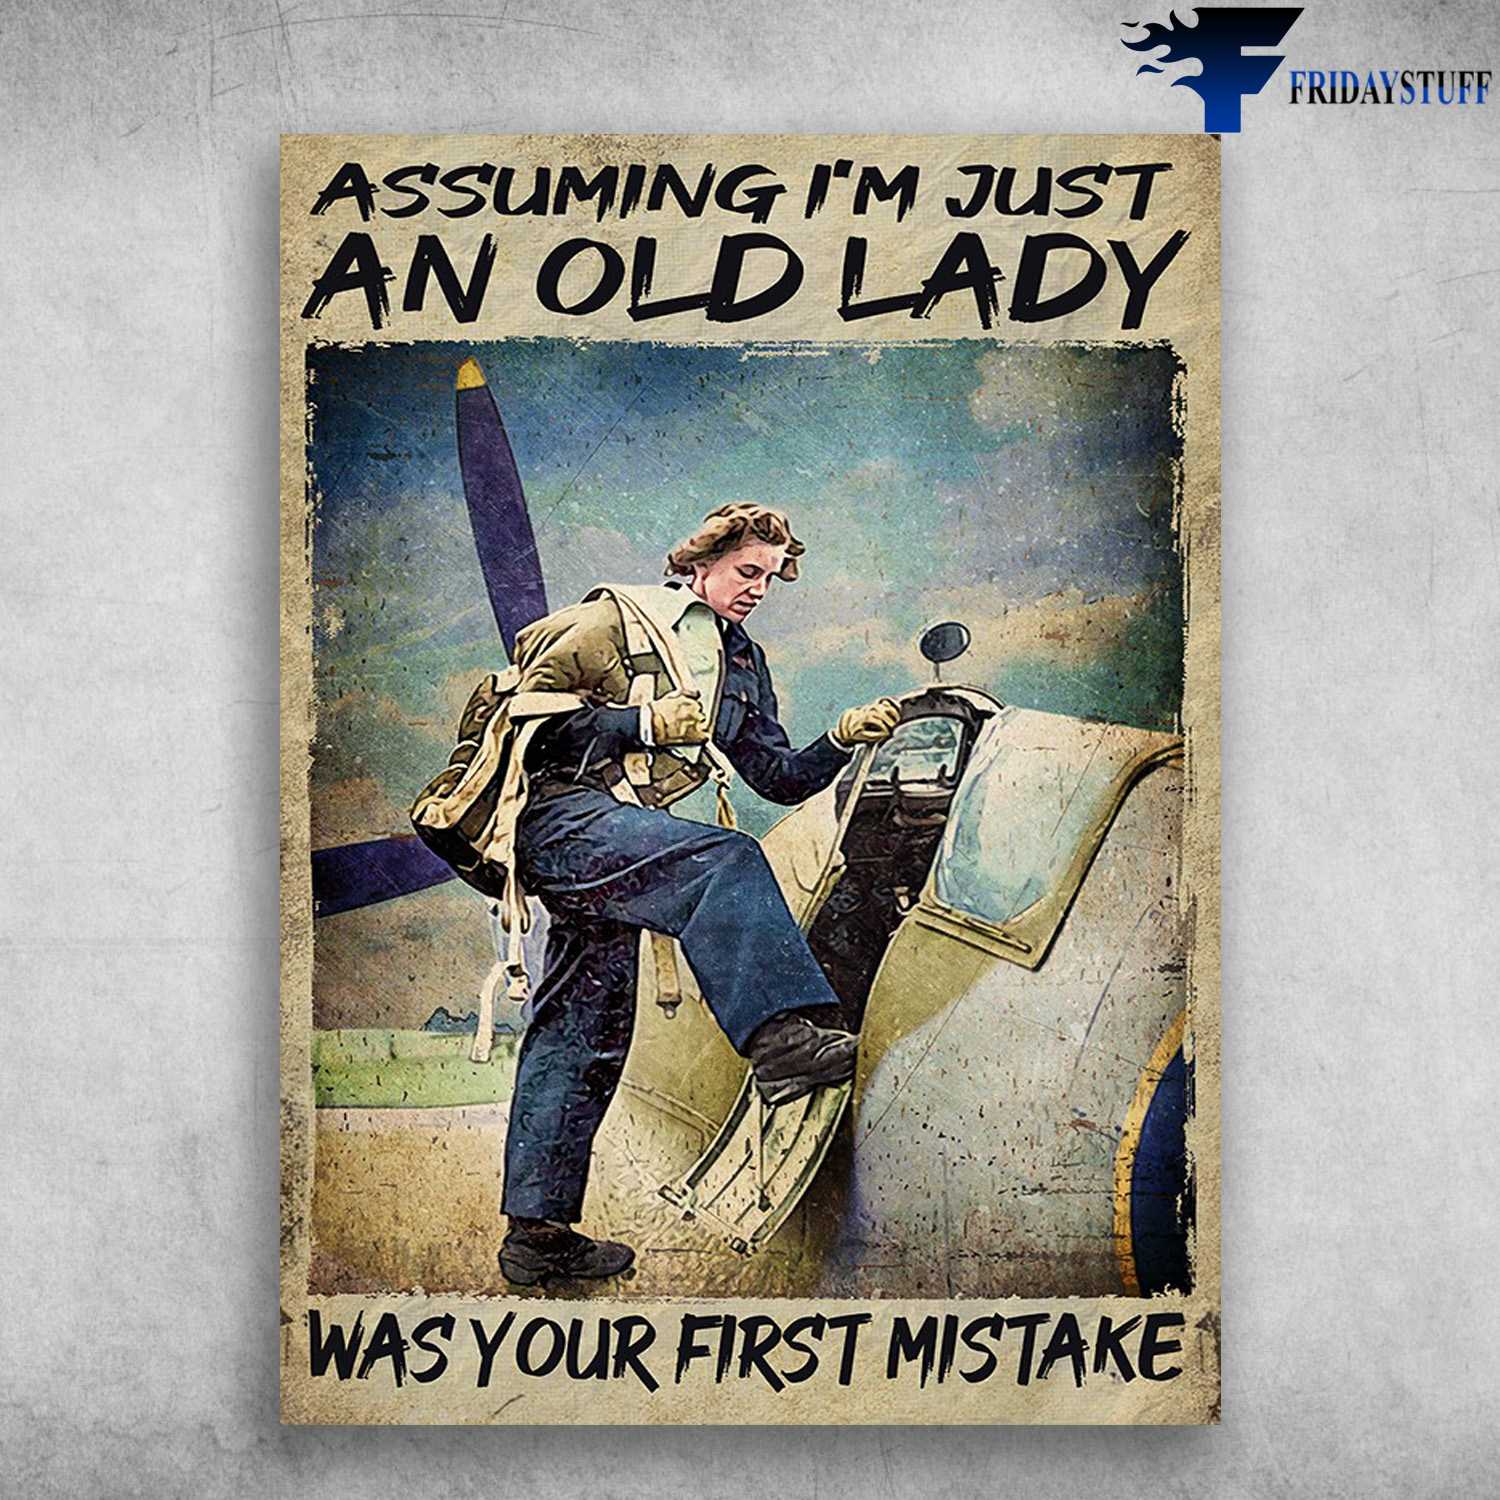 Female Pilot - Assuming I'm Just An Old Lady, Was Your First Mistake